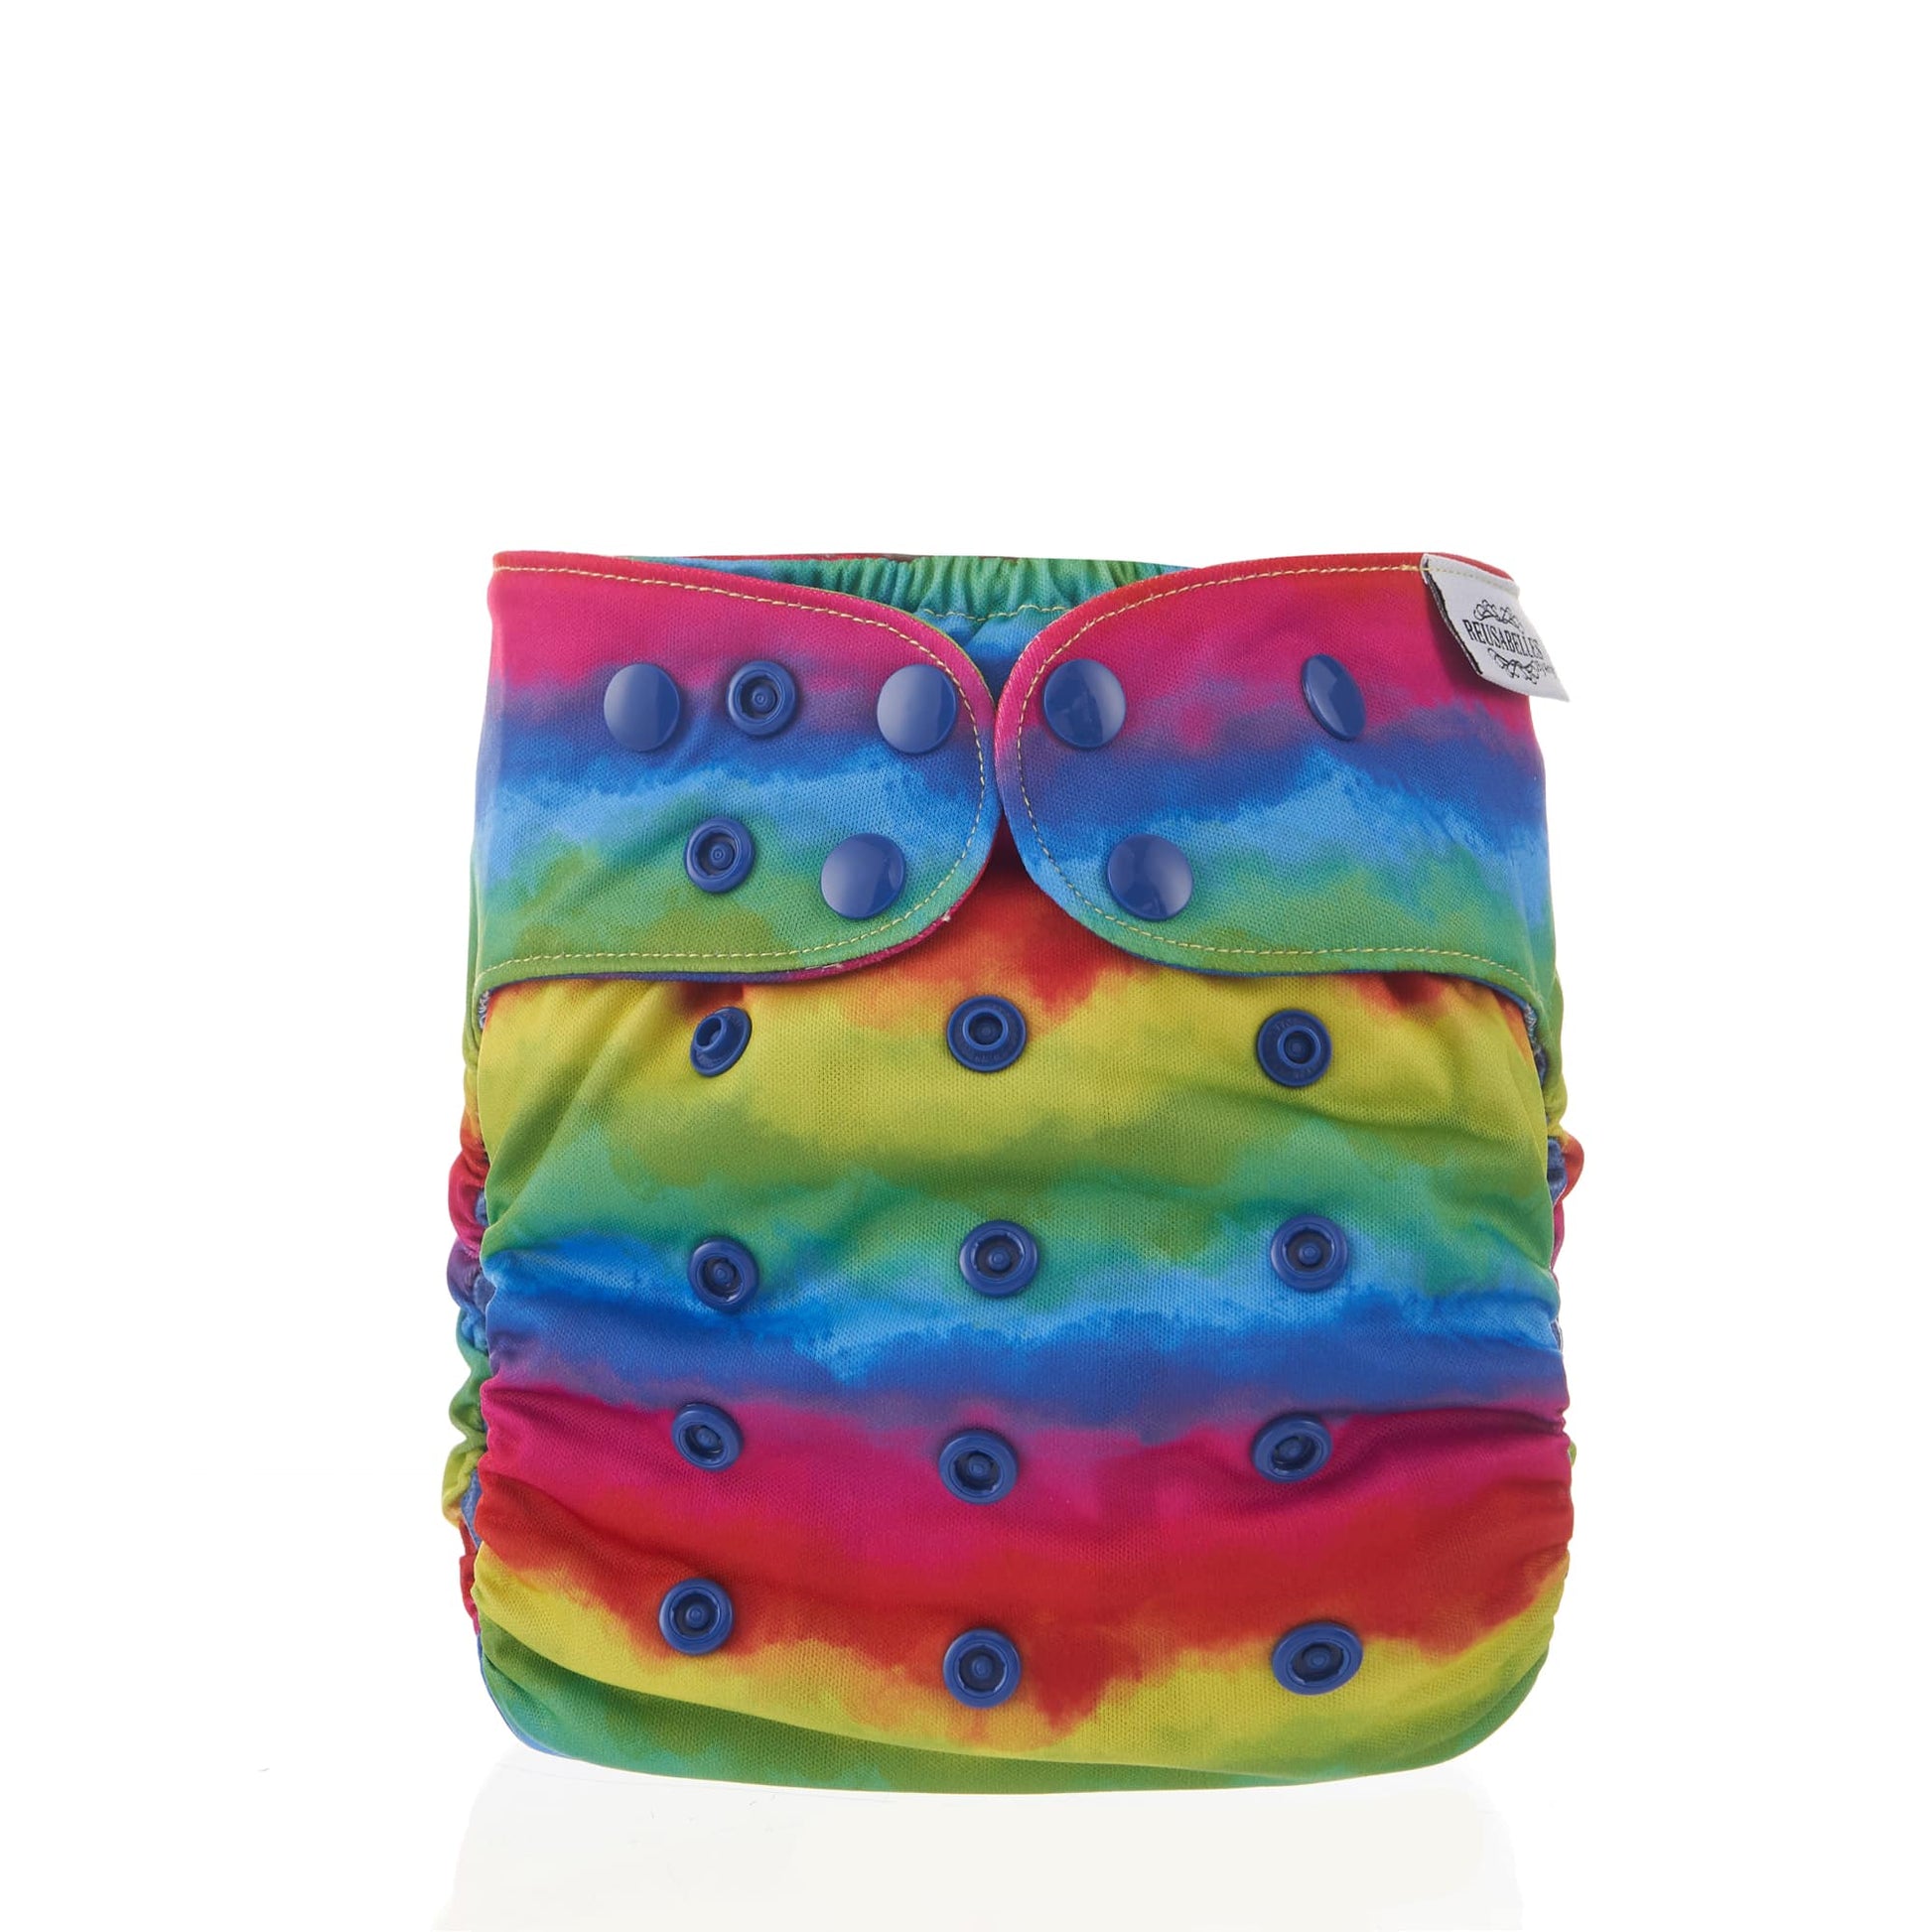 Reusable cloth nappy with a rainbow stripe pattern.